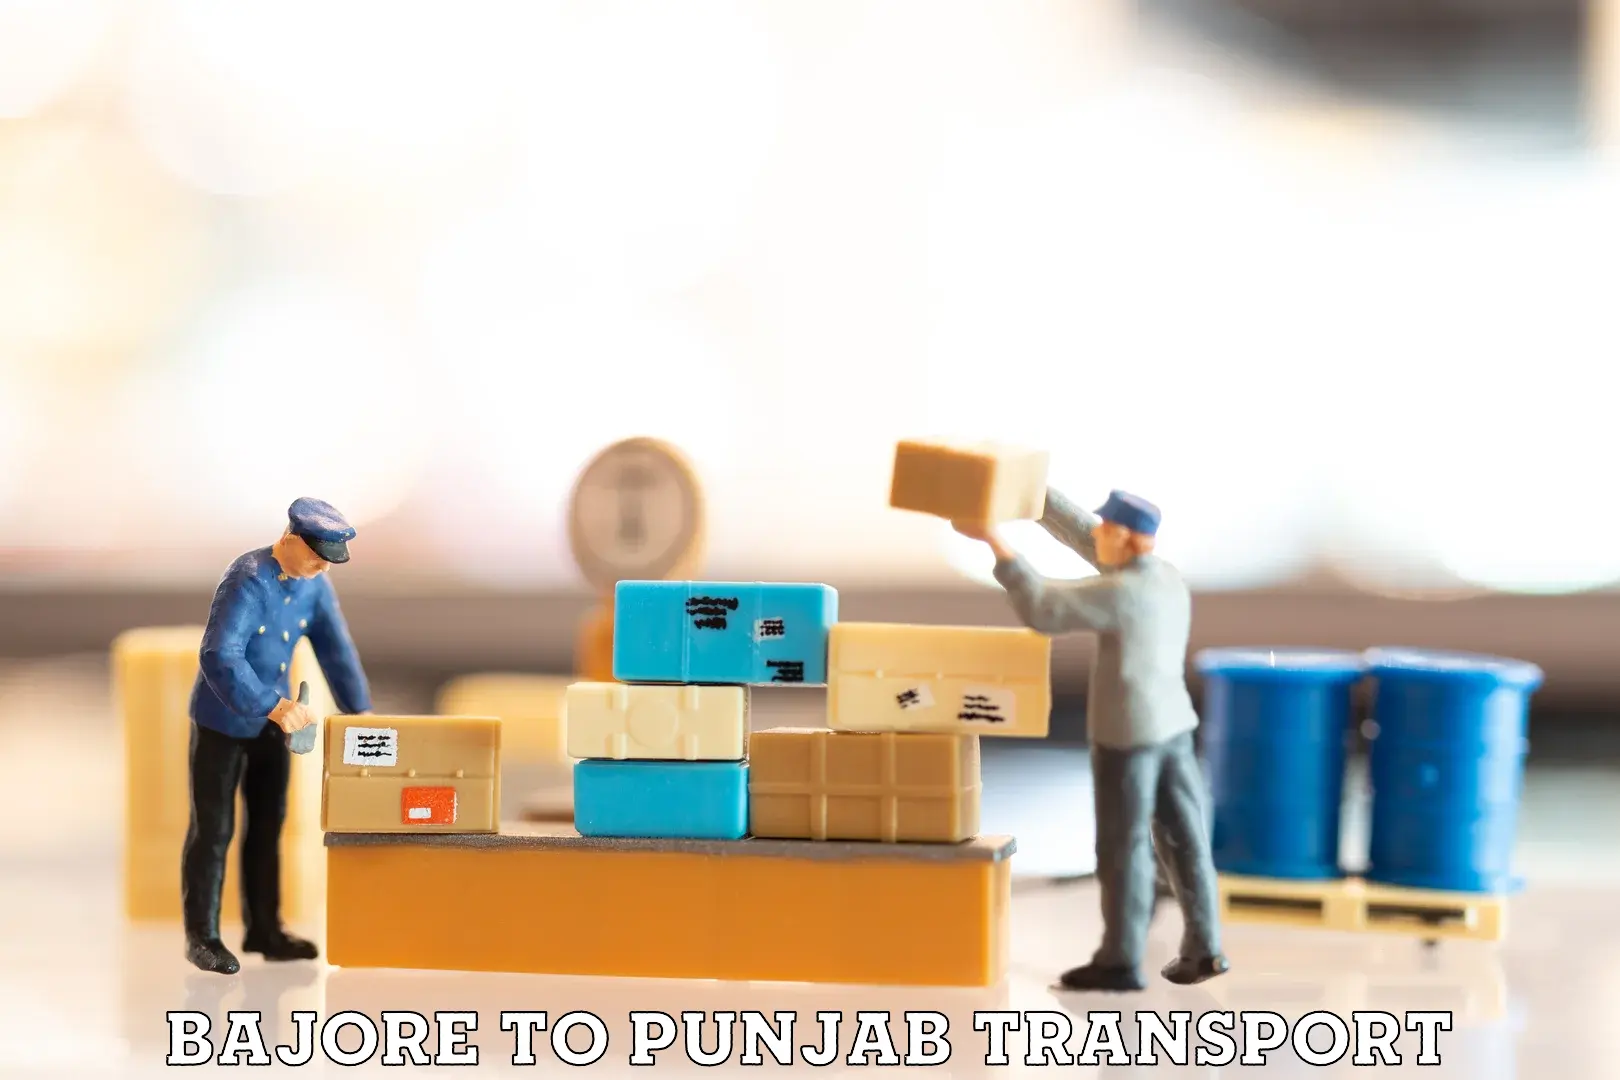 Truck transport companies in India Bajore to Jalandhar